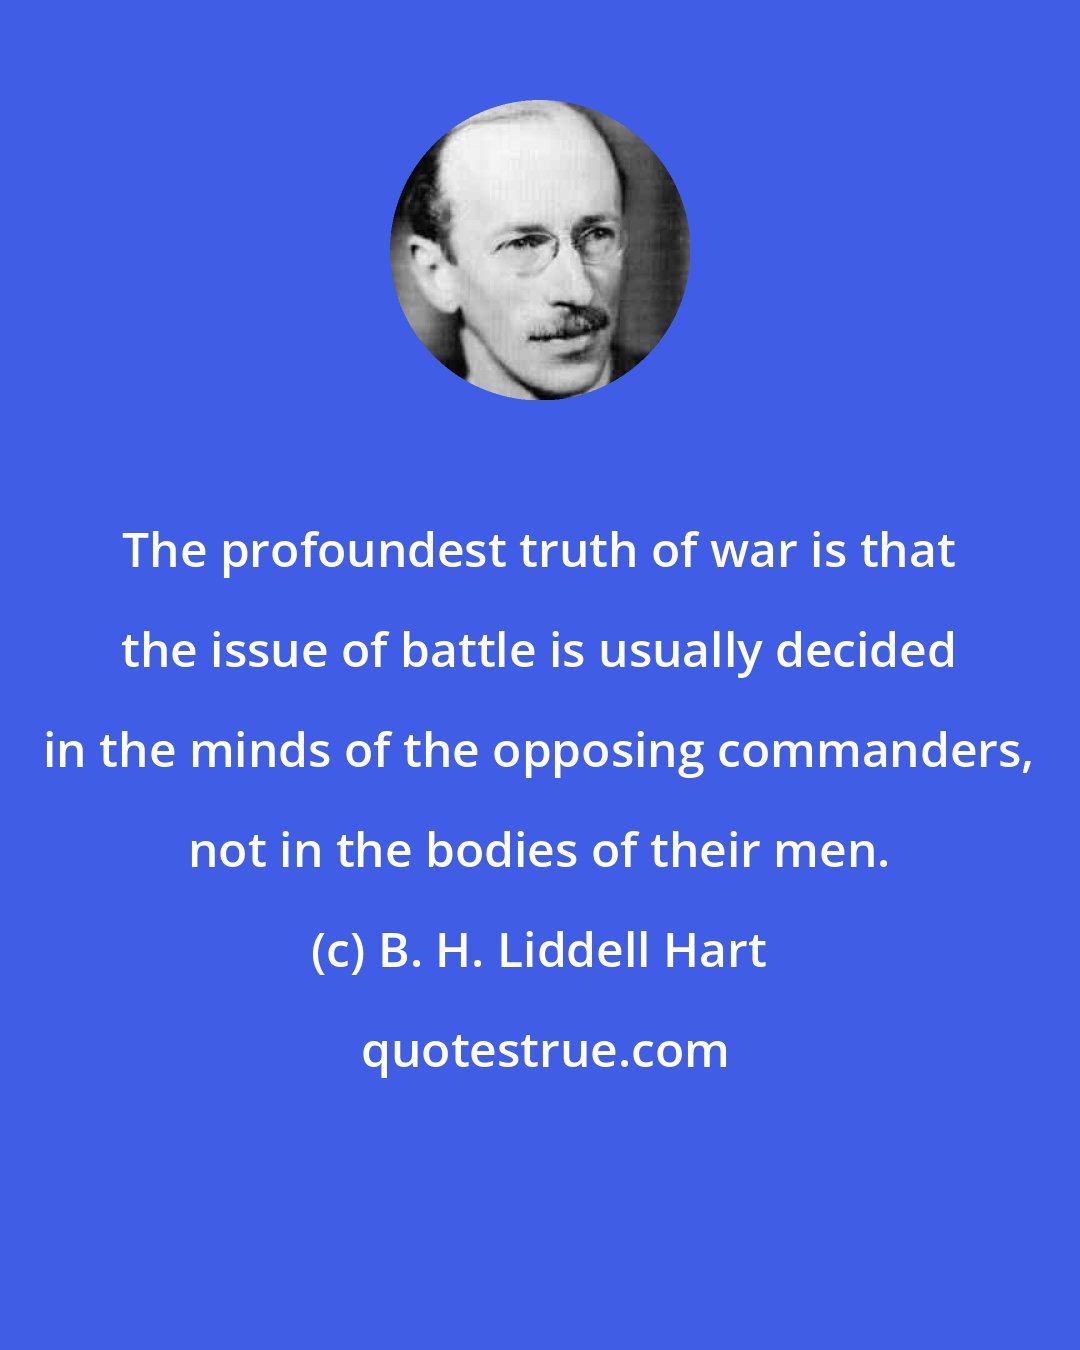 B. H. Liddell Hart: The profoundest truth of war is that the issue of battle is usually decided in the minds of the opposing commanders, not in the bodies of their men.